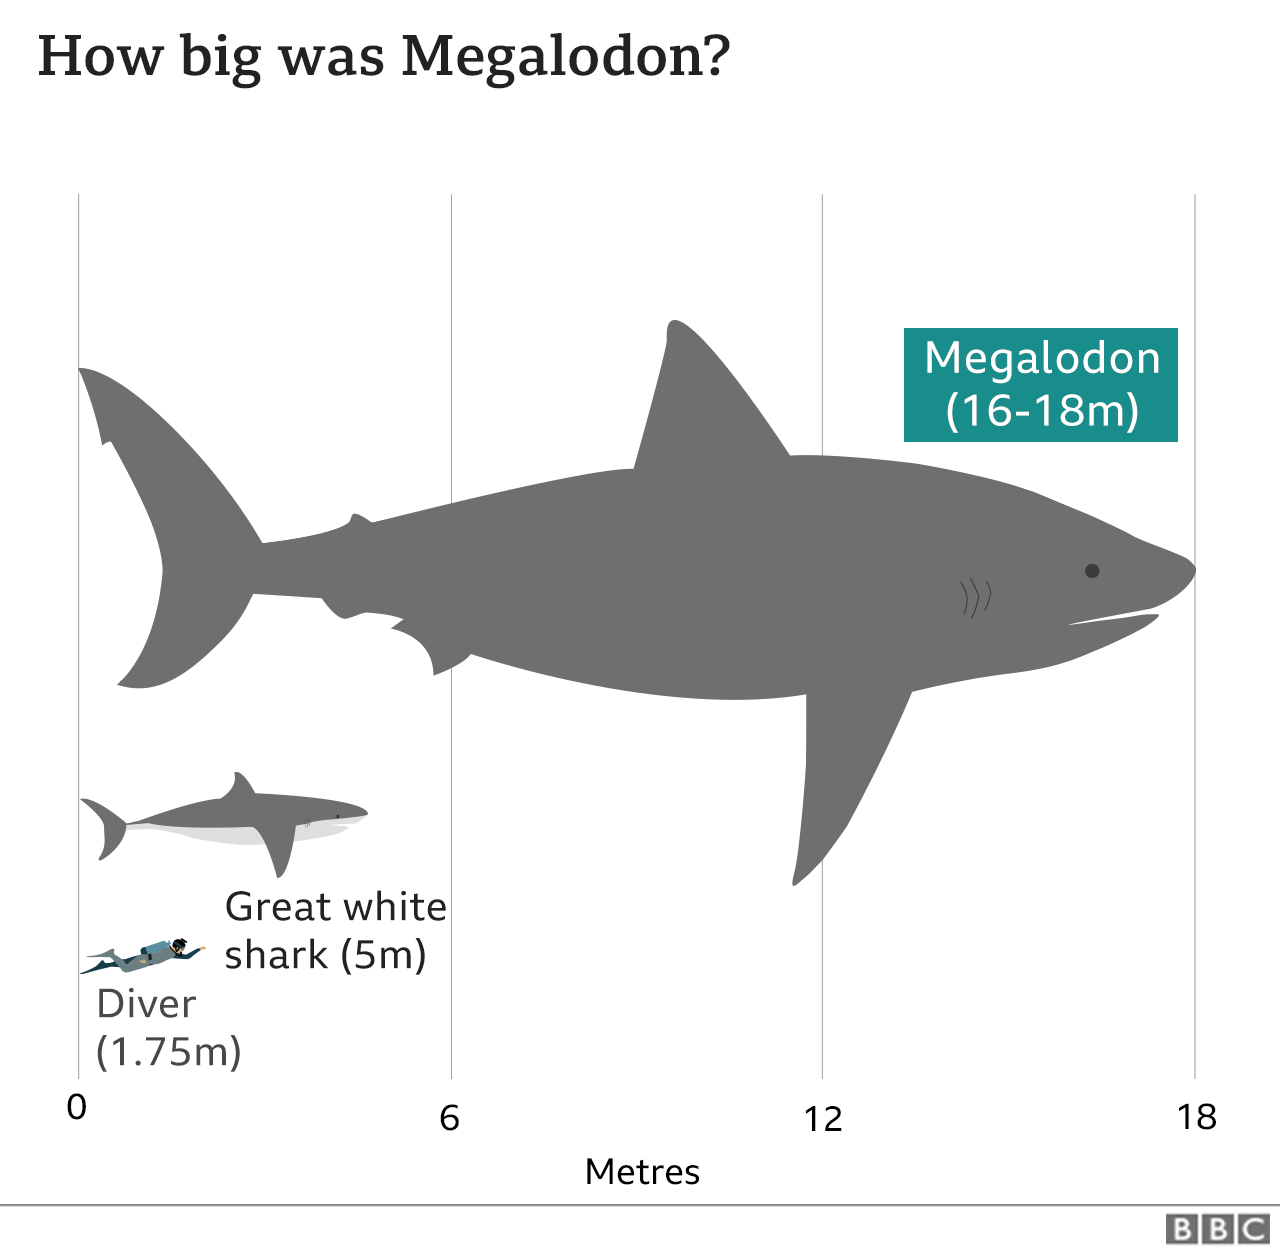 Megalodon might have competed with great white sharks